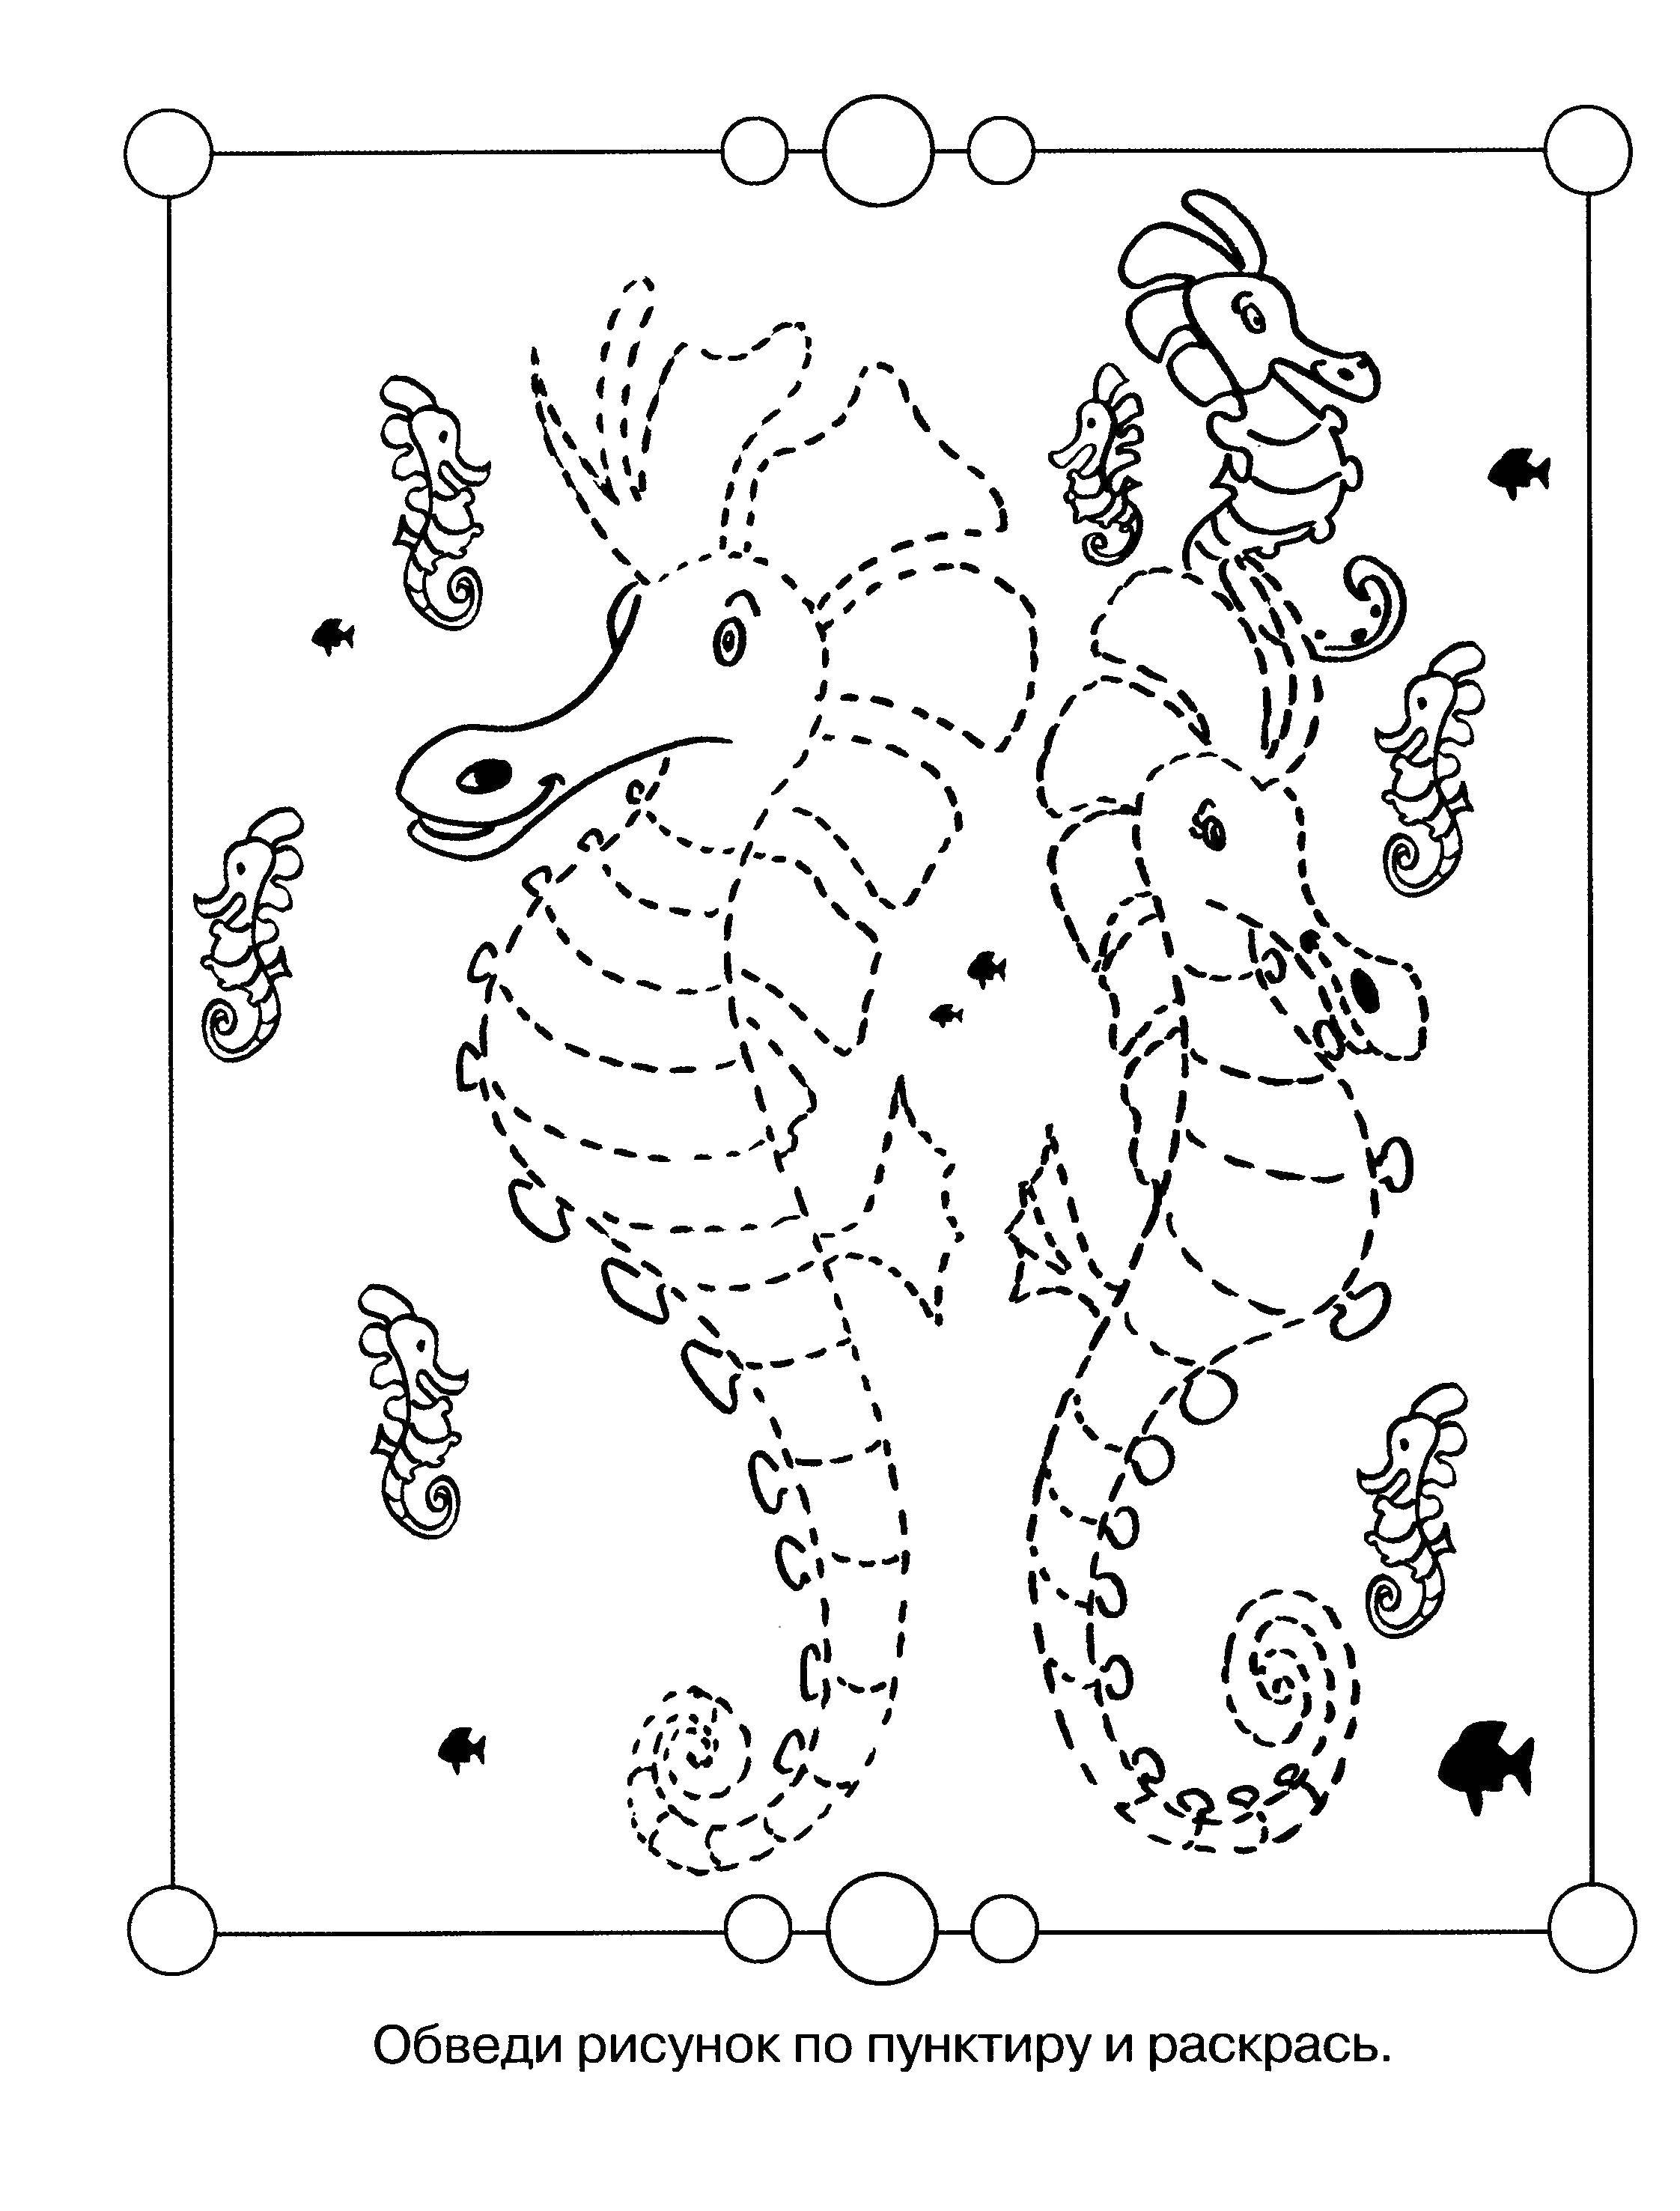 Coloring Trace the contour and color .. Category riddles for kids. Tags:  Pattern , stroke path.